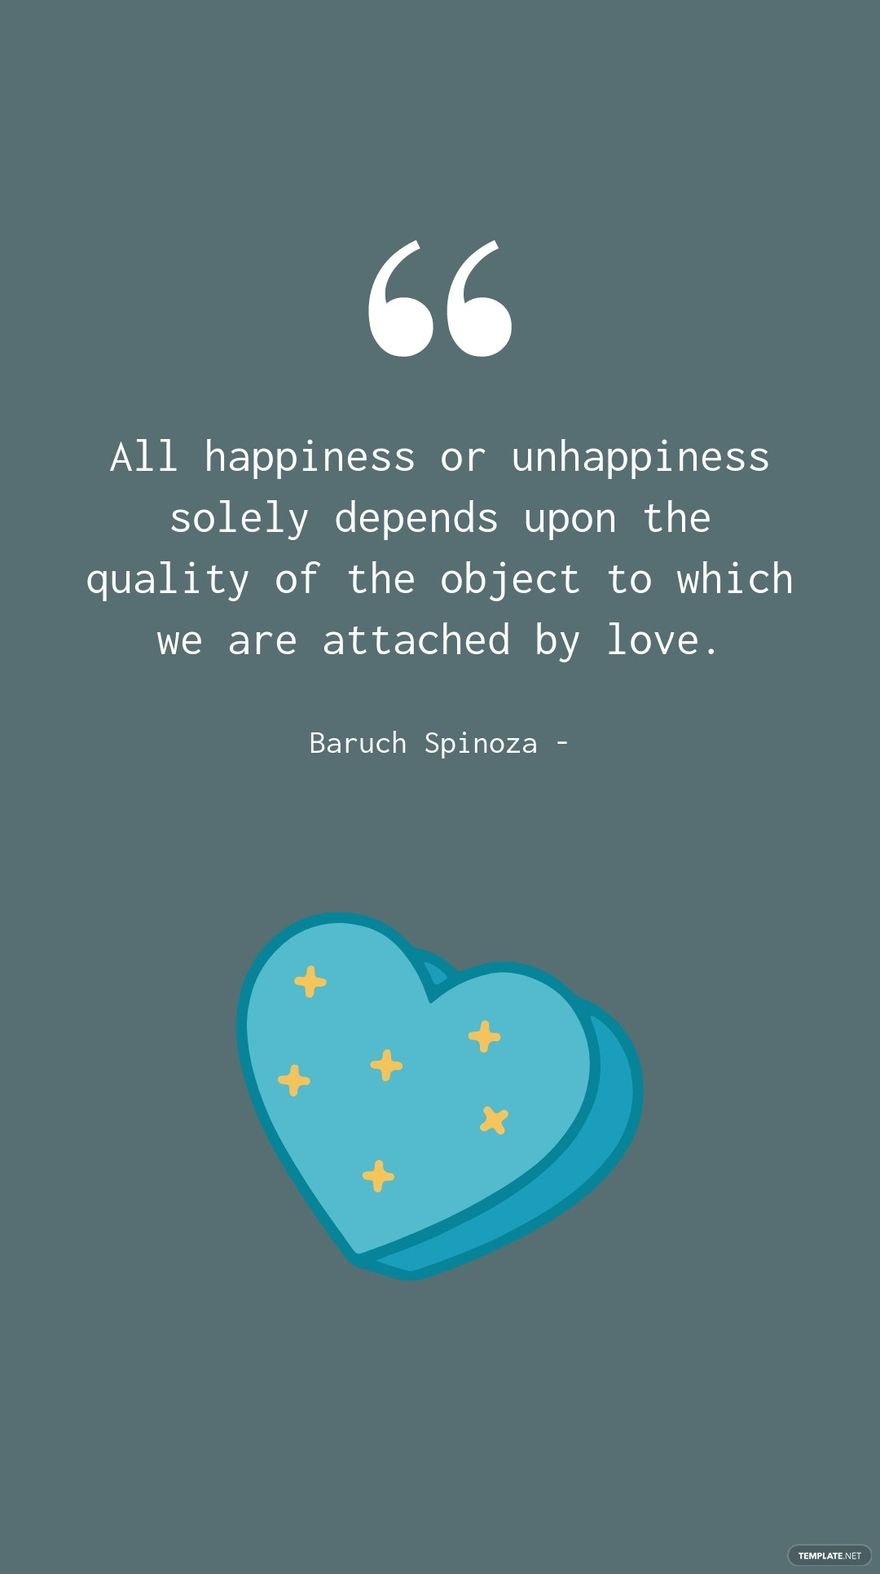 Baruch Spinoza - All happiness or unhappiness solely depends upon the quality of the object to which we are attached by love.